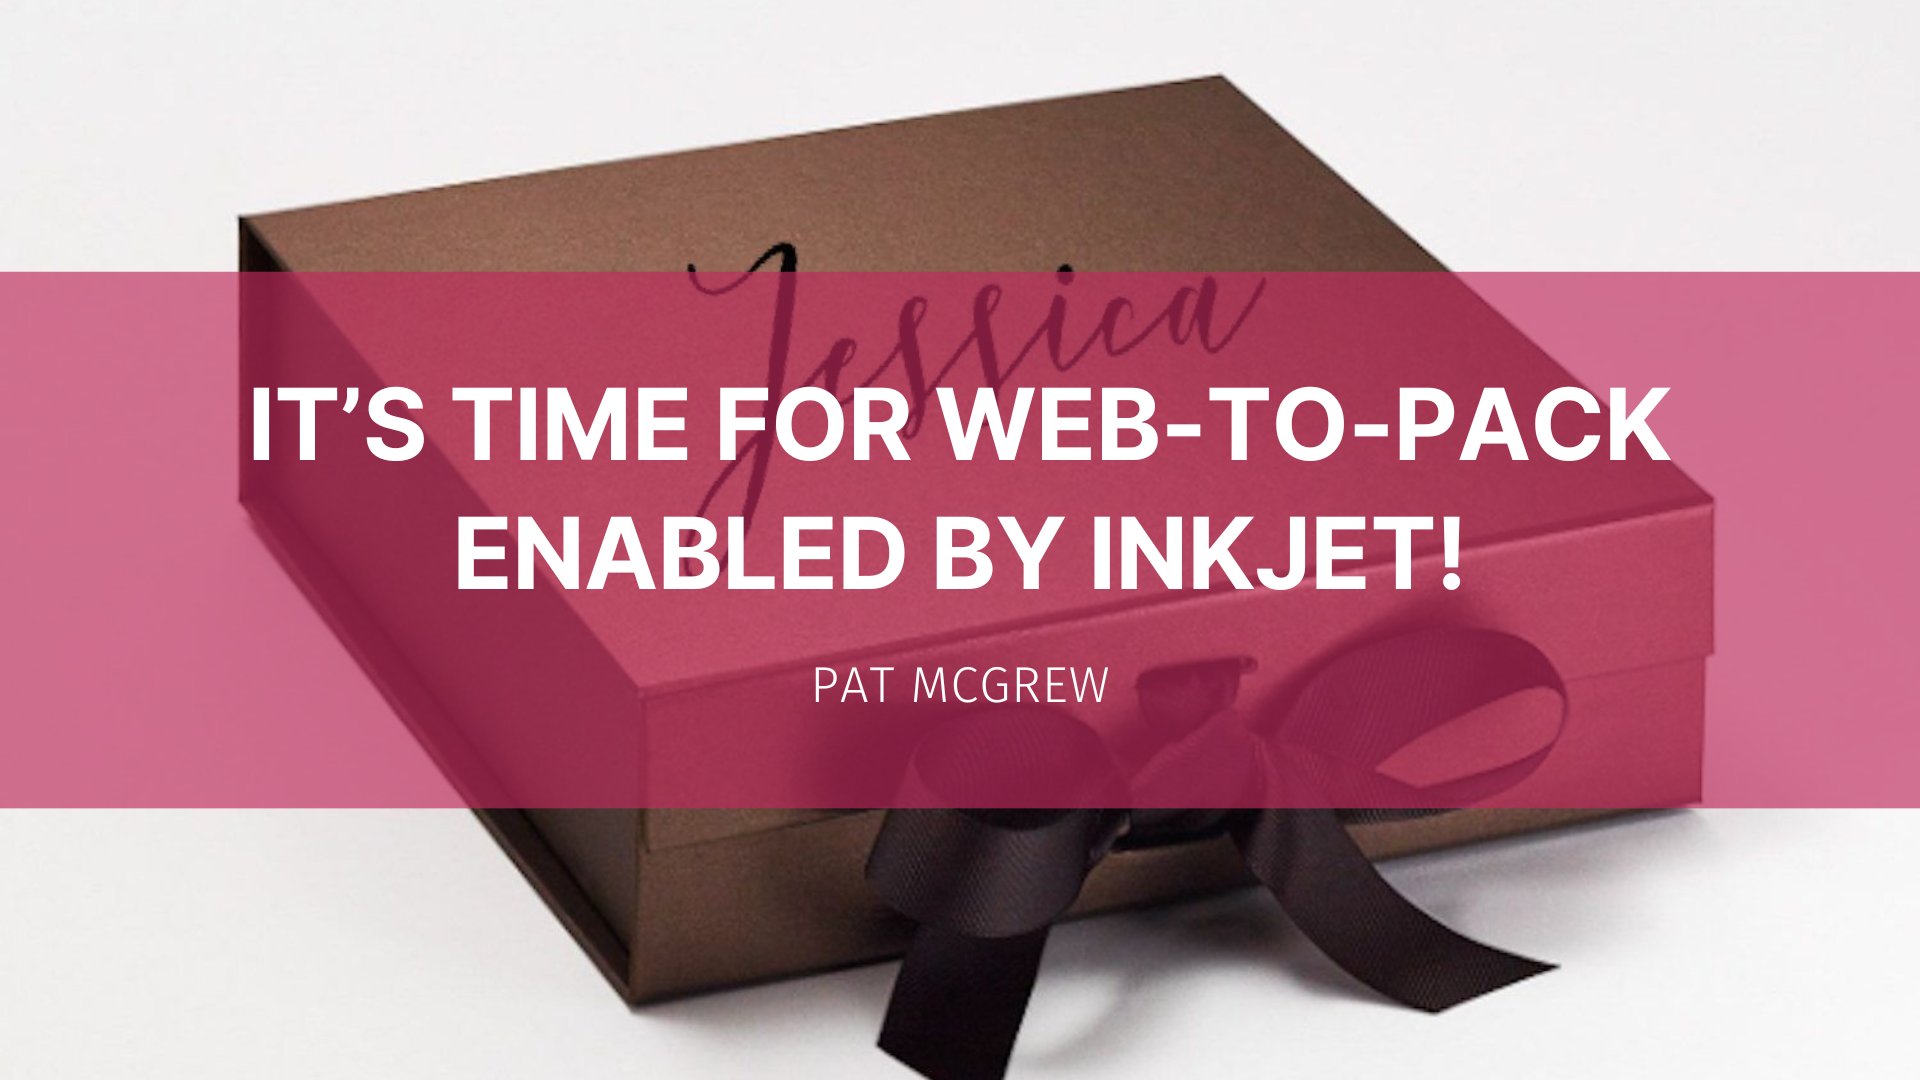 Featured image for “It’s Time for Web-to-Pack Enabled by Inkjet!”